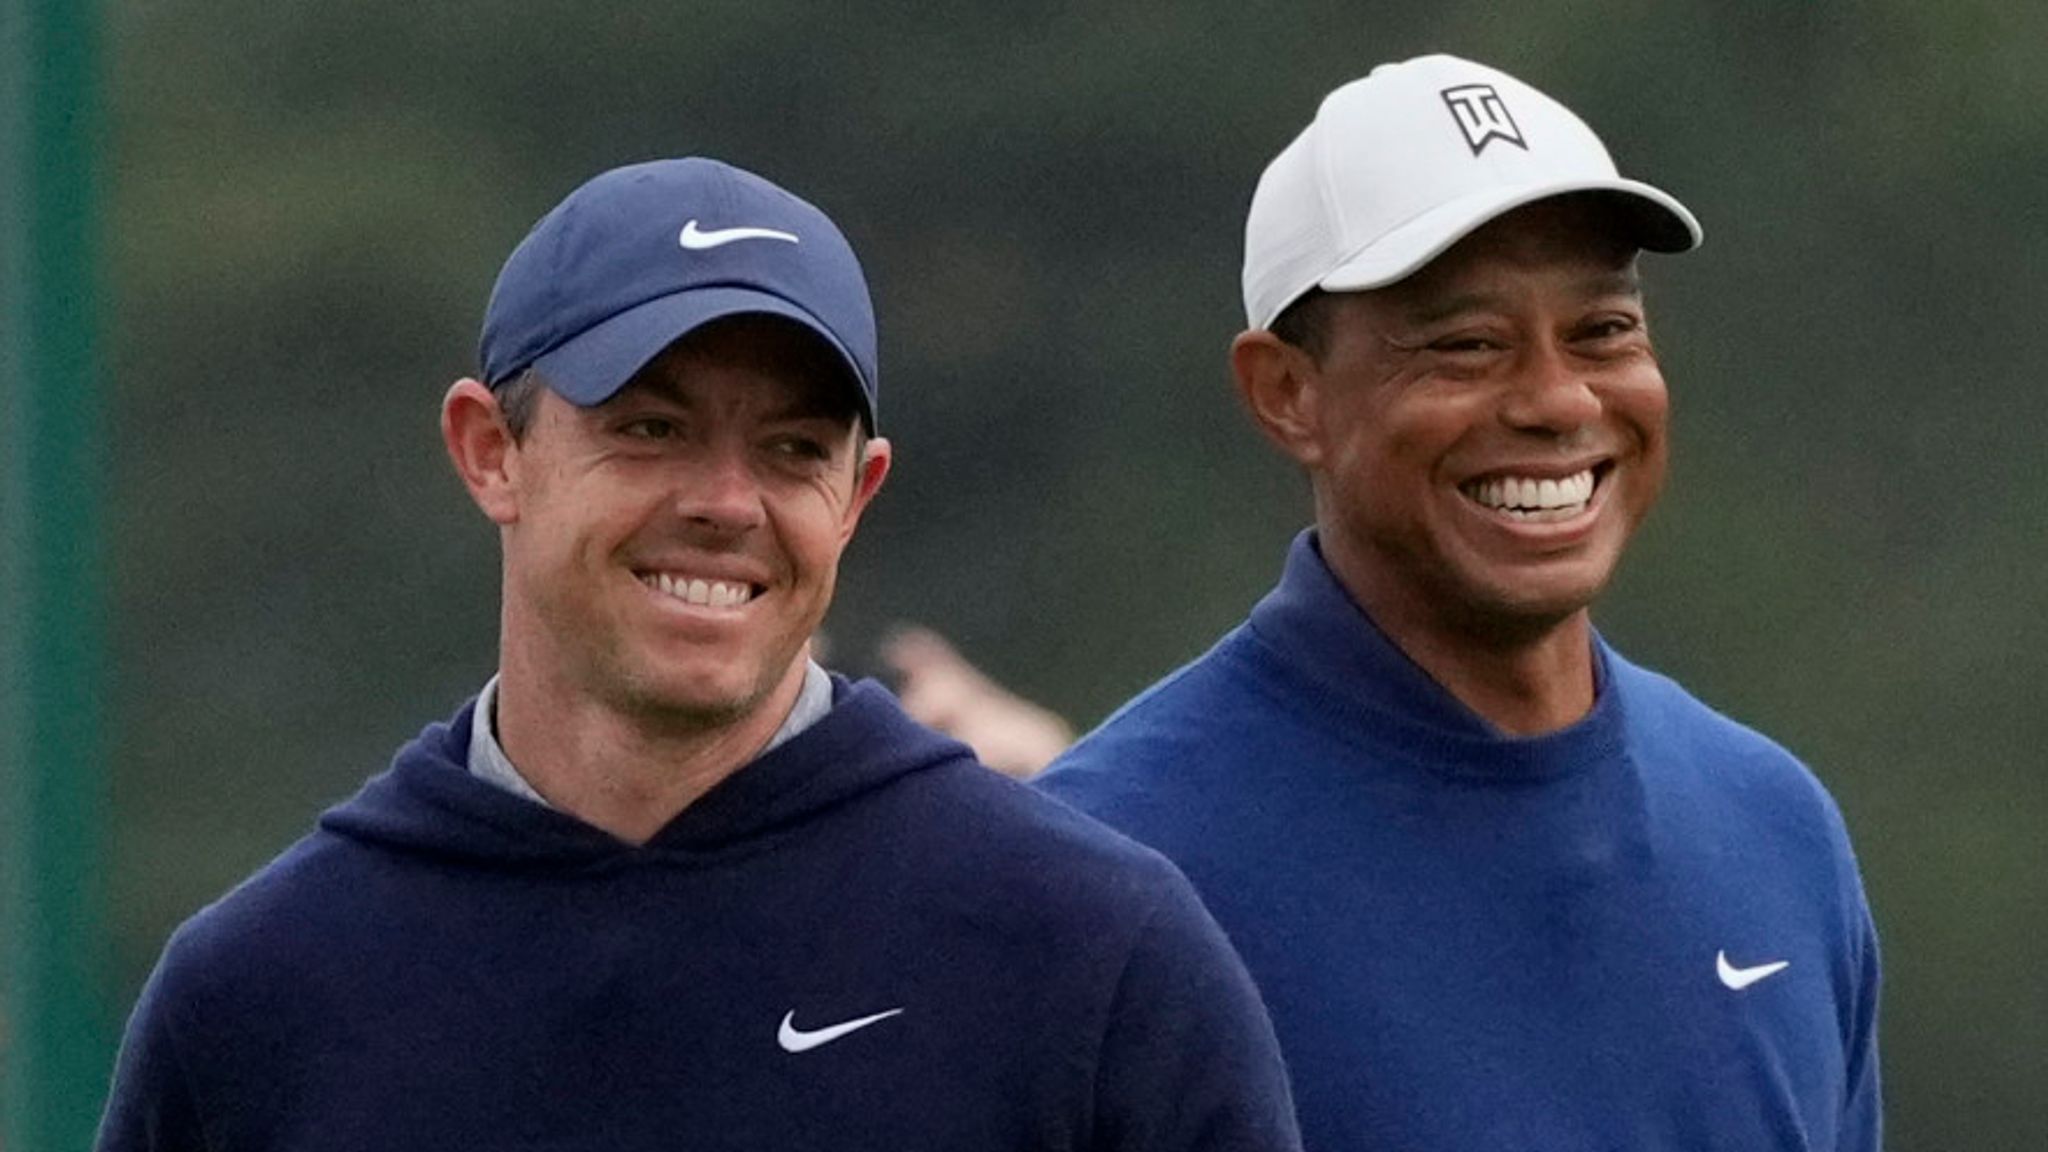 Tiger Woods takes TGL team ownership stake, will play as well